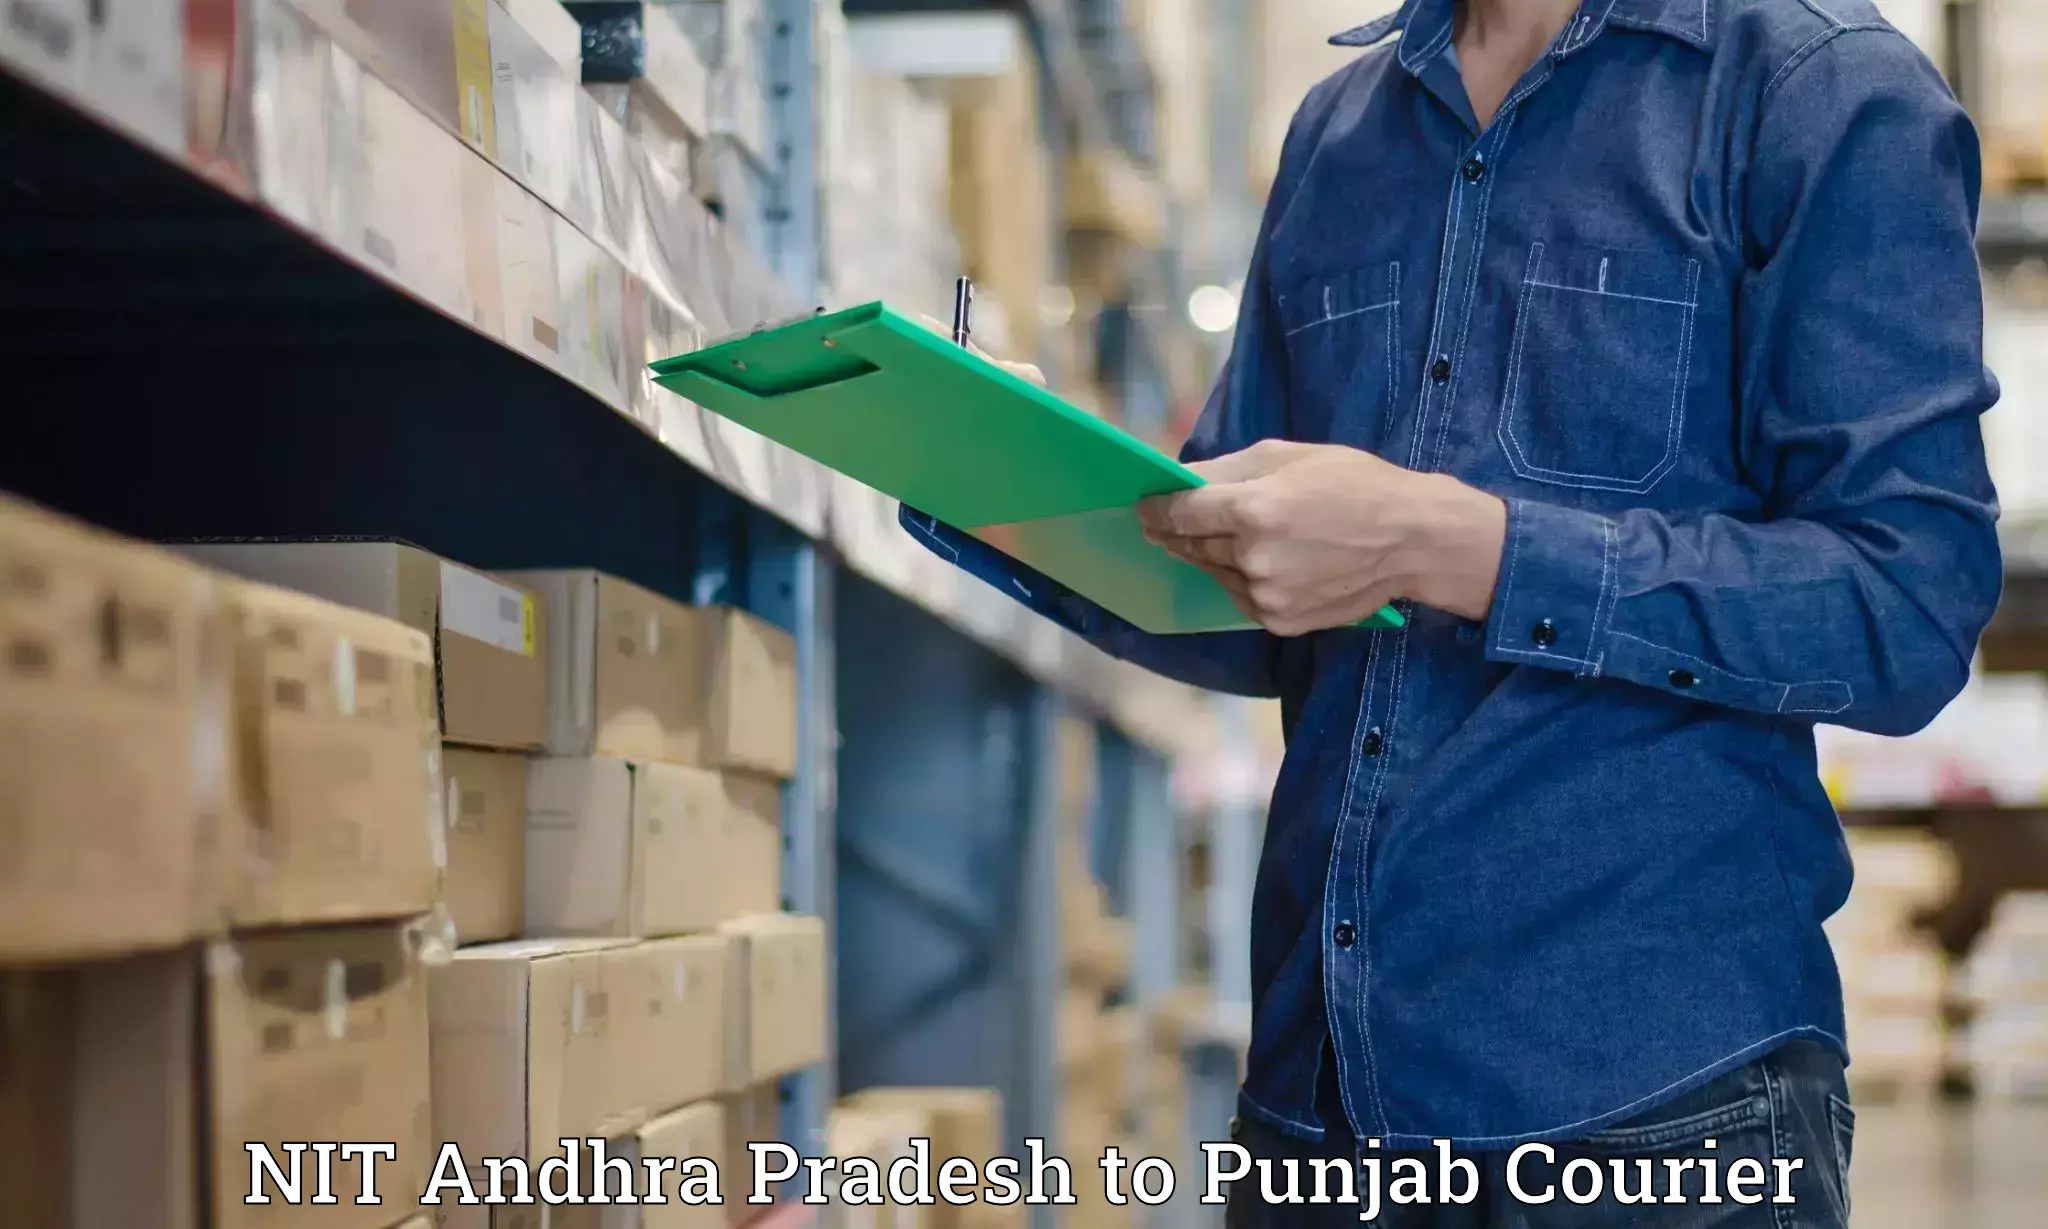 State-of-the-art courier technology NIT Andhra Pradesh to Punjab